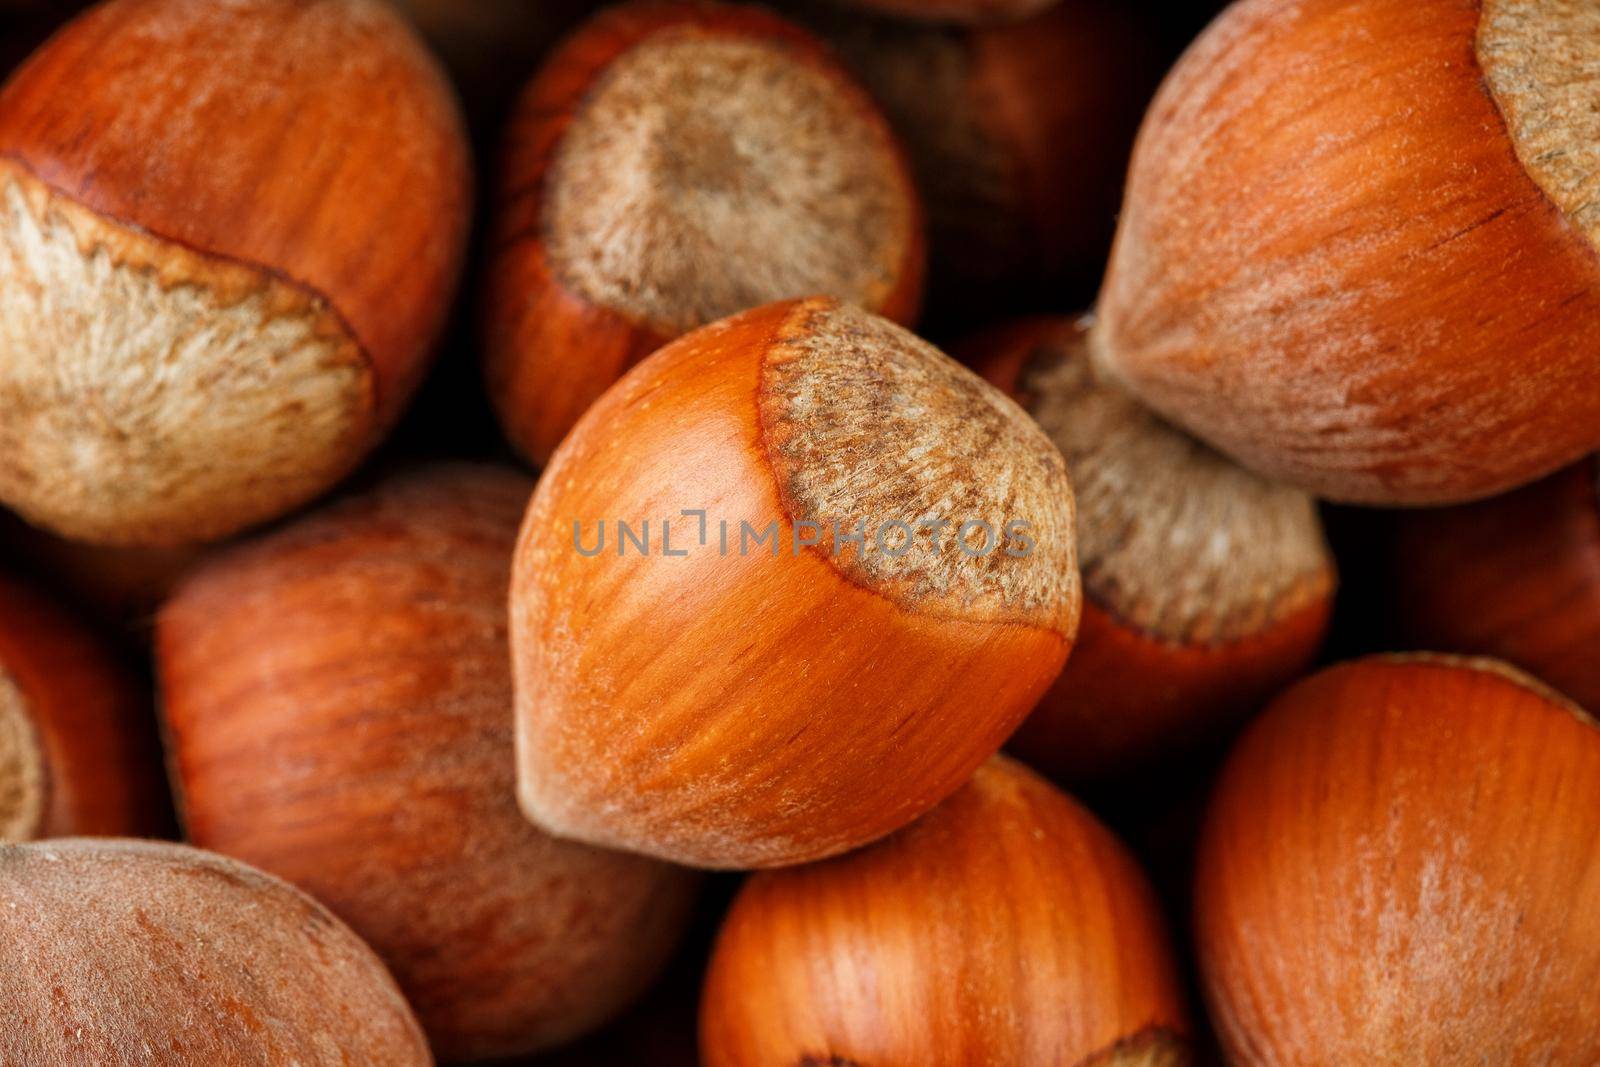 Dried unshelled hazelnuts seeds of Whole nuts as background by AlexGrec